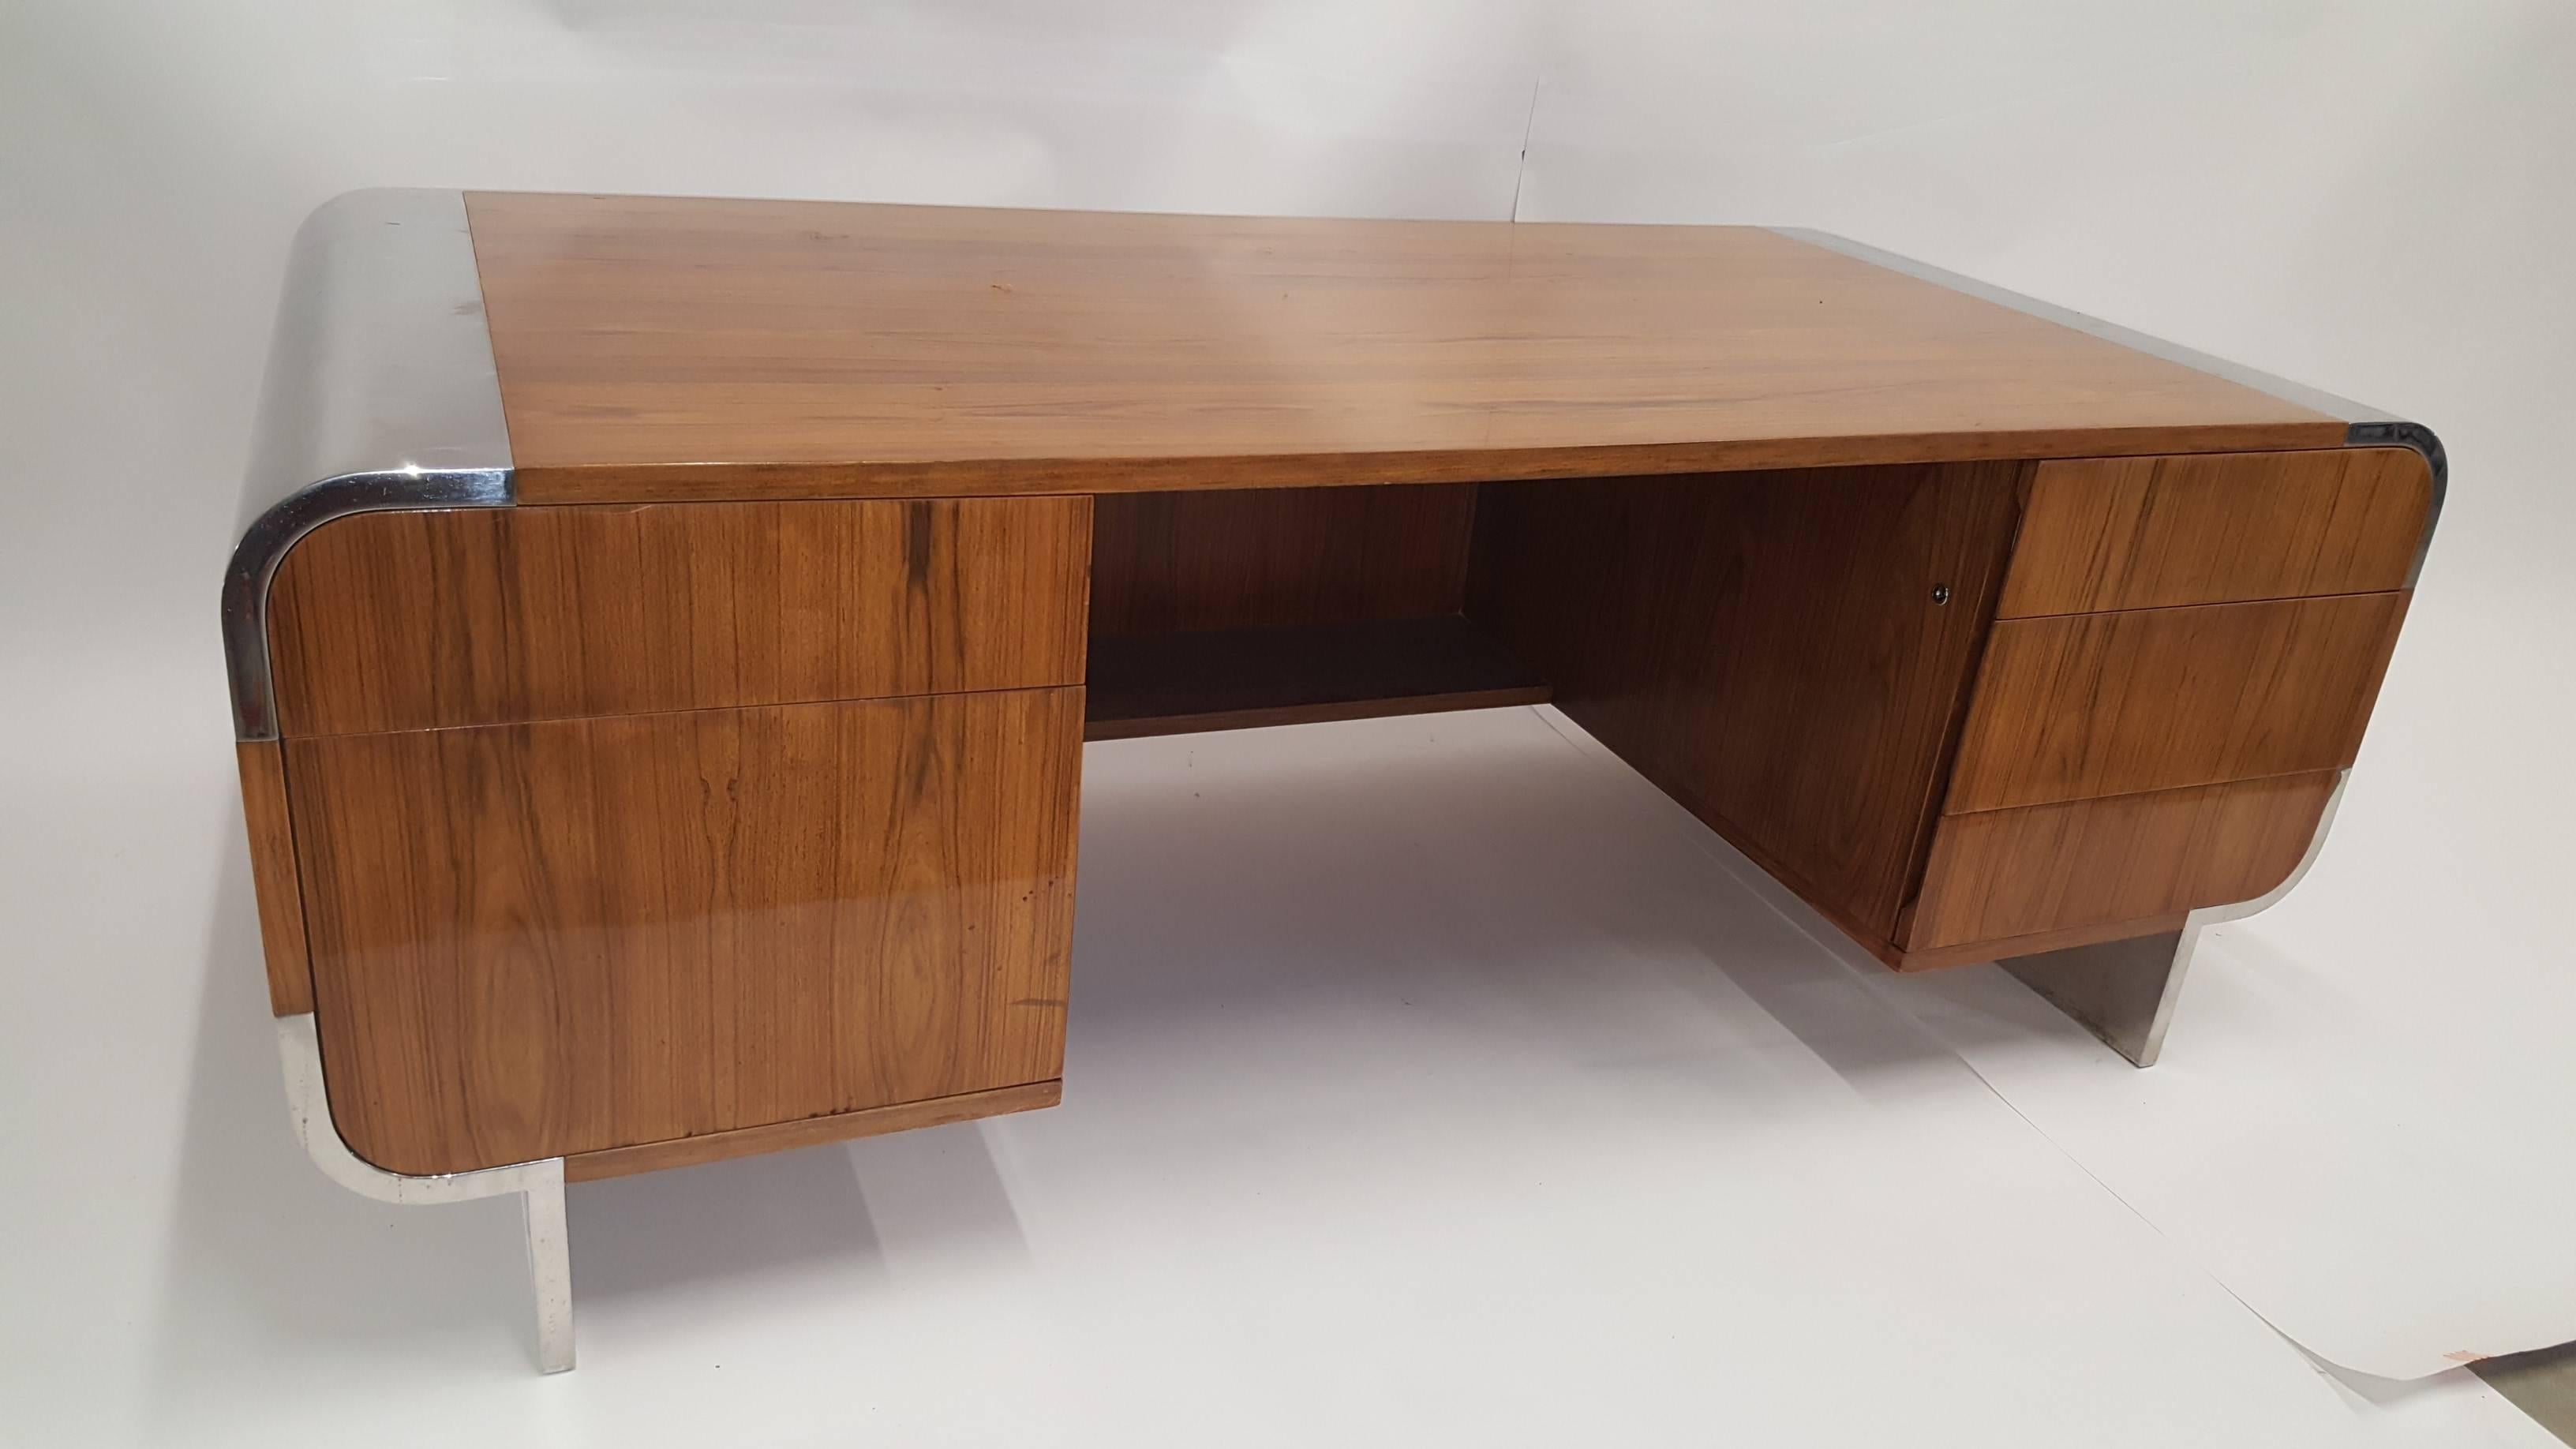 Incredible 1970s executive Pace desk designed by Leon Rosen, beautiful walnut wood,, with chrome waterfall edges. Rare modern partners desk, designed for individuals to work on both sides of desk, with slide out shelves on opposite side of draws.